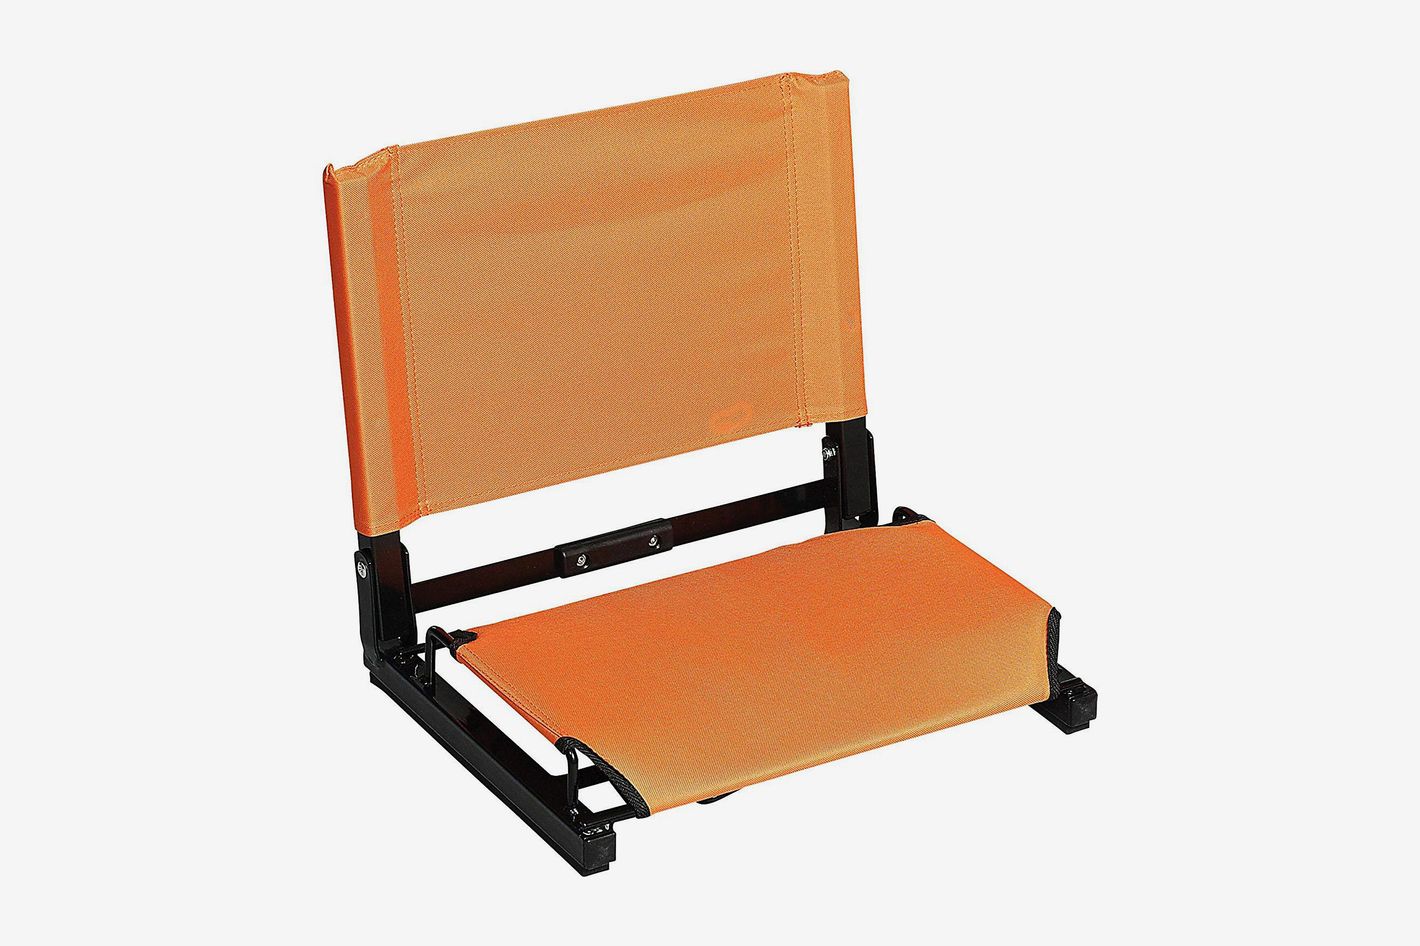 has deals on its bestselling stadium chairs 